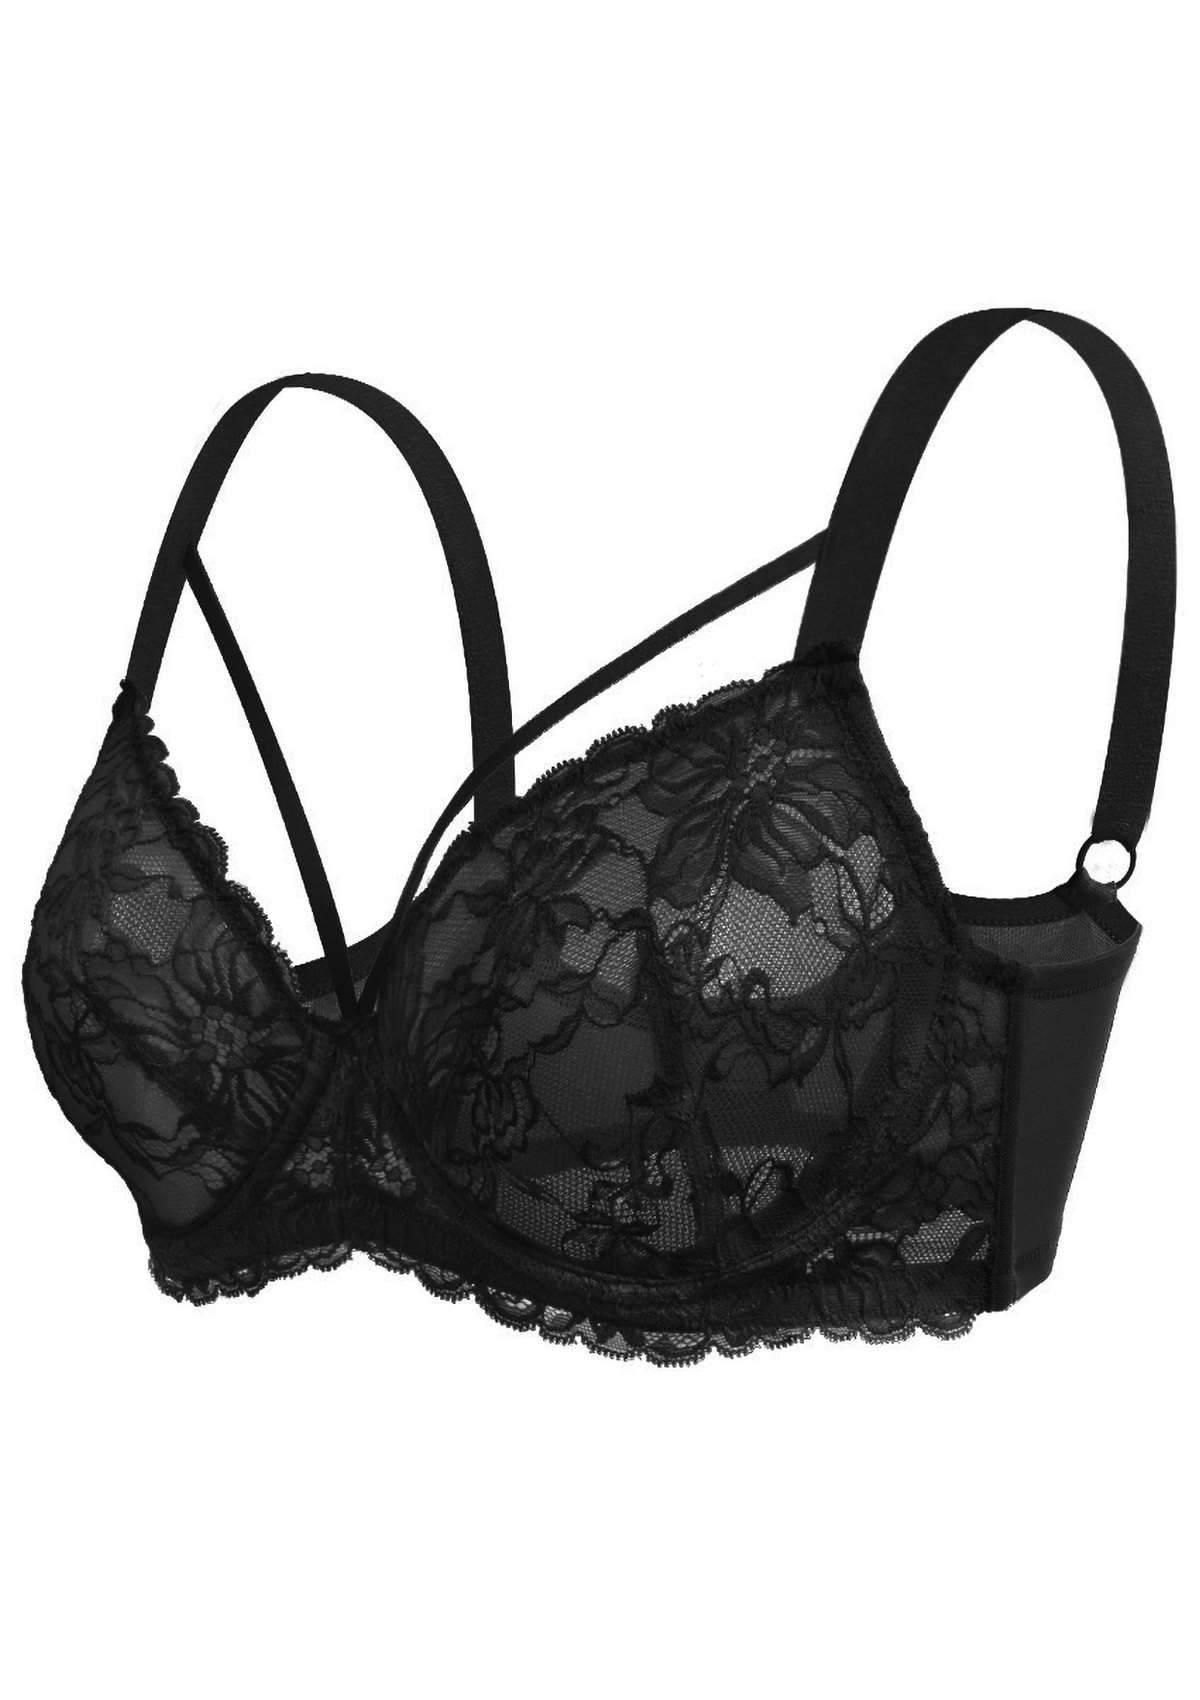 HSIA Pretty In Petals Bra - Plus Size Lingerie For Comfrot And Support - Black / 40 / G